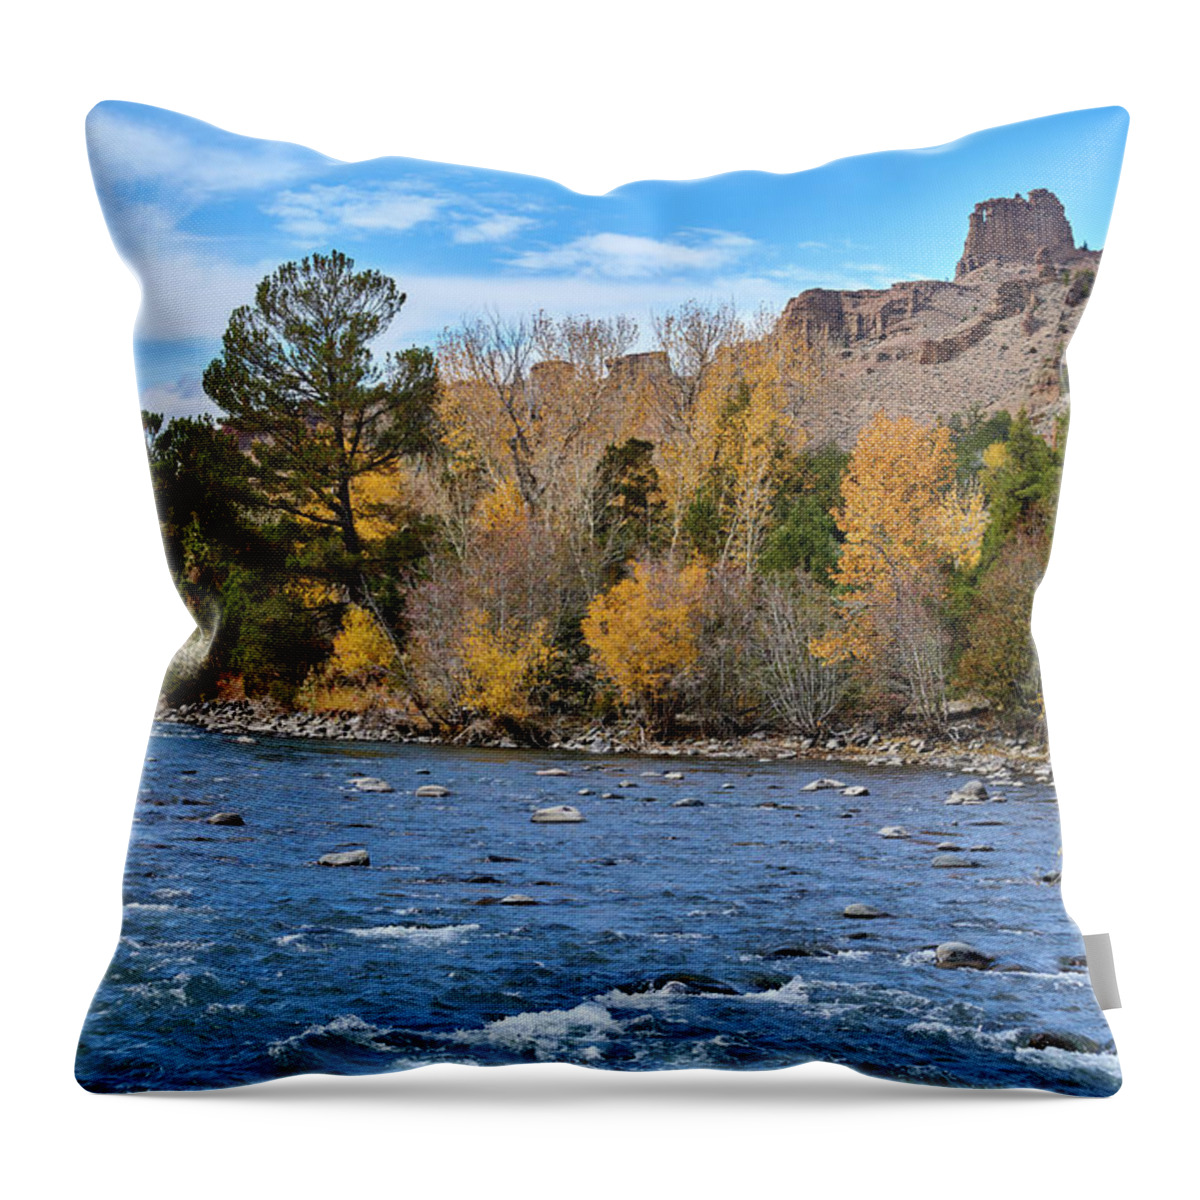 River Throw Pillow featuring the photograph Shoshone River by Paul Freidlund